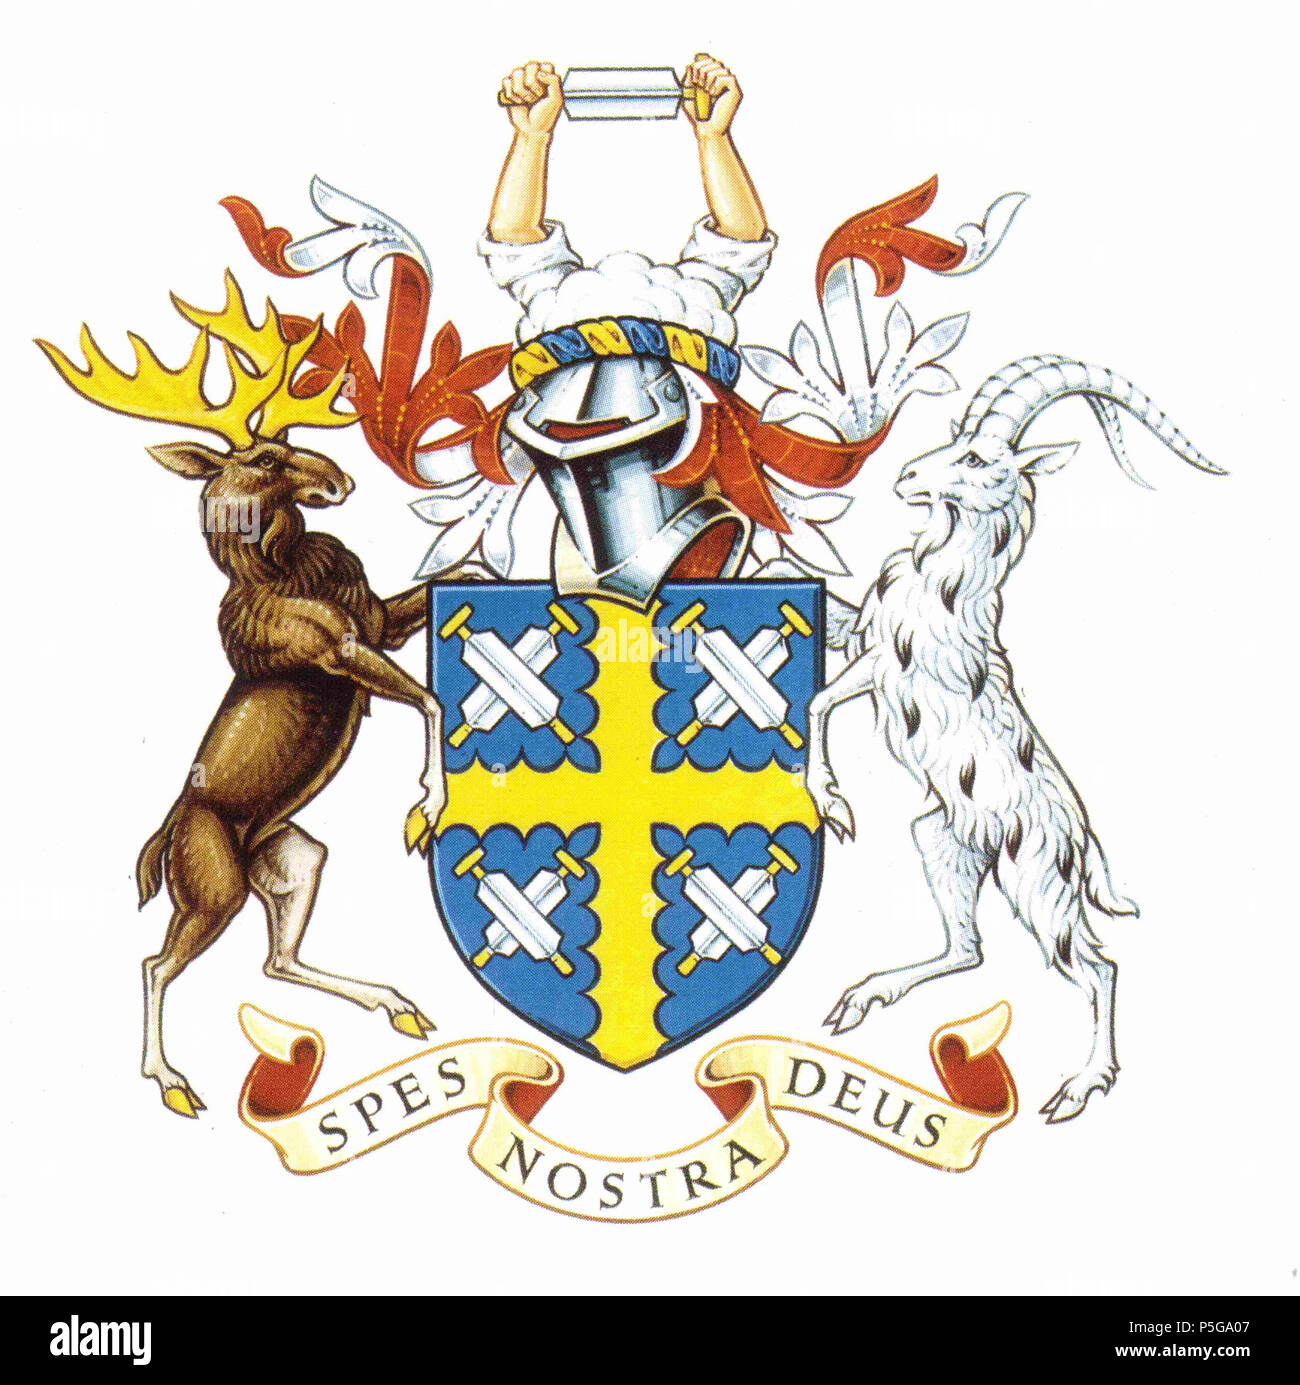 N/A. English: Arms: Azure a cross engrailed or between four pairs of shaves in saltire argent handled or. Crest: On a wreath or and azure out of the clouds proper two arms embowed carnation the shirt sleeves folded beneath the elbows argent in the hands a shave argent handled or. Supporters: Dexter, an elk proper attired and unguled or; Sinister, a goat argent flashed sable. 8 August 1583. College of Arms 357 Coat of Arms Colour large Stock Photo